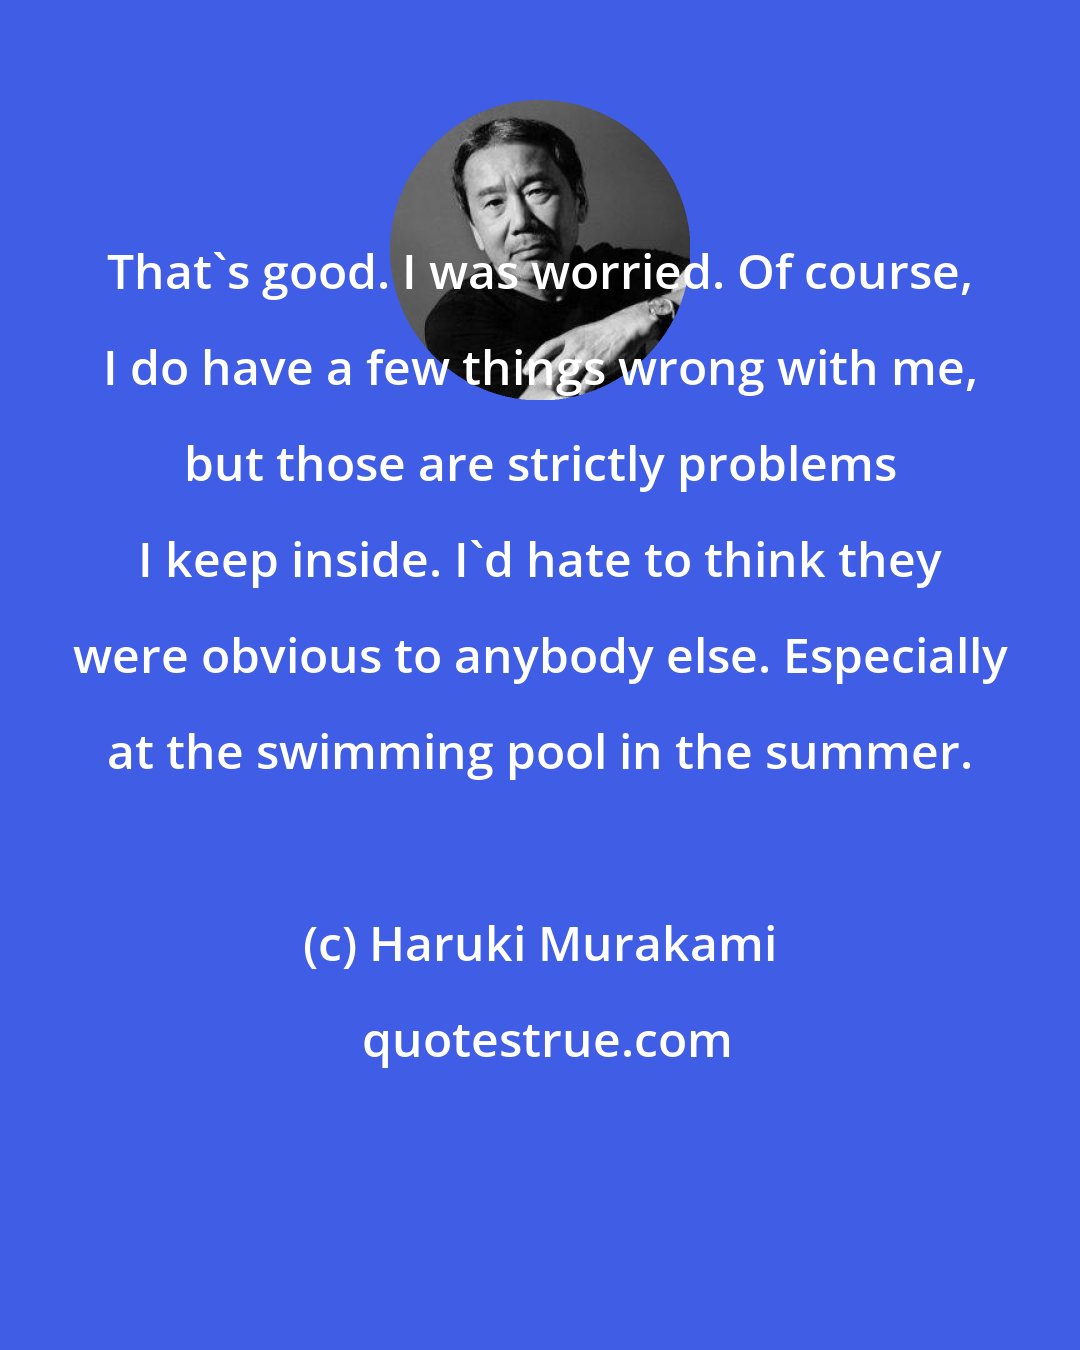 Haruki Murakami: That's good. I was worried. Of course, I do have a few things wrong with me, but those are strictly problems I keep inside. I'd hate to think they were obvious to anybody else. Especially at the swimming pool in the summer.